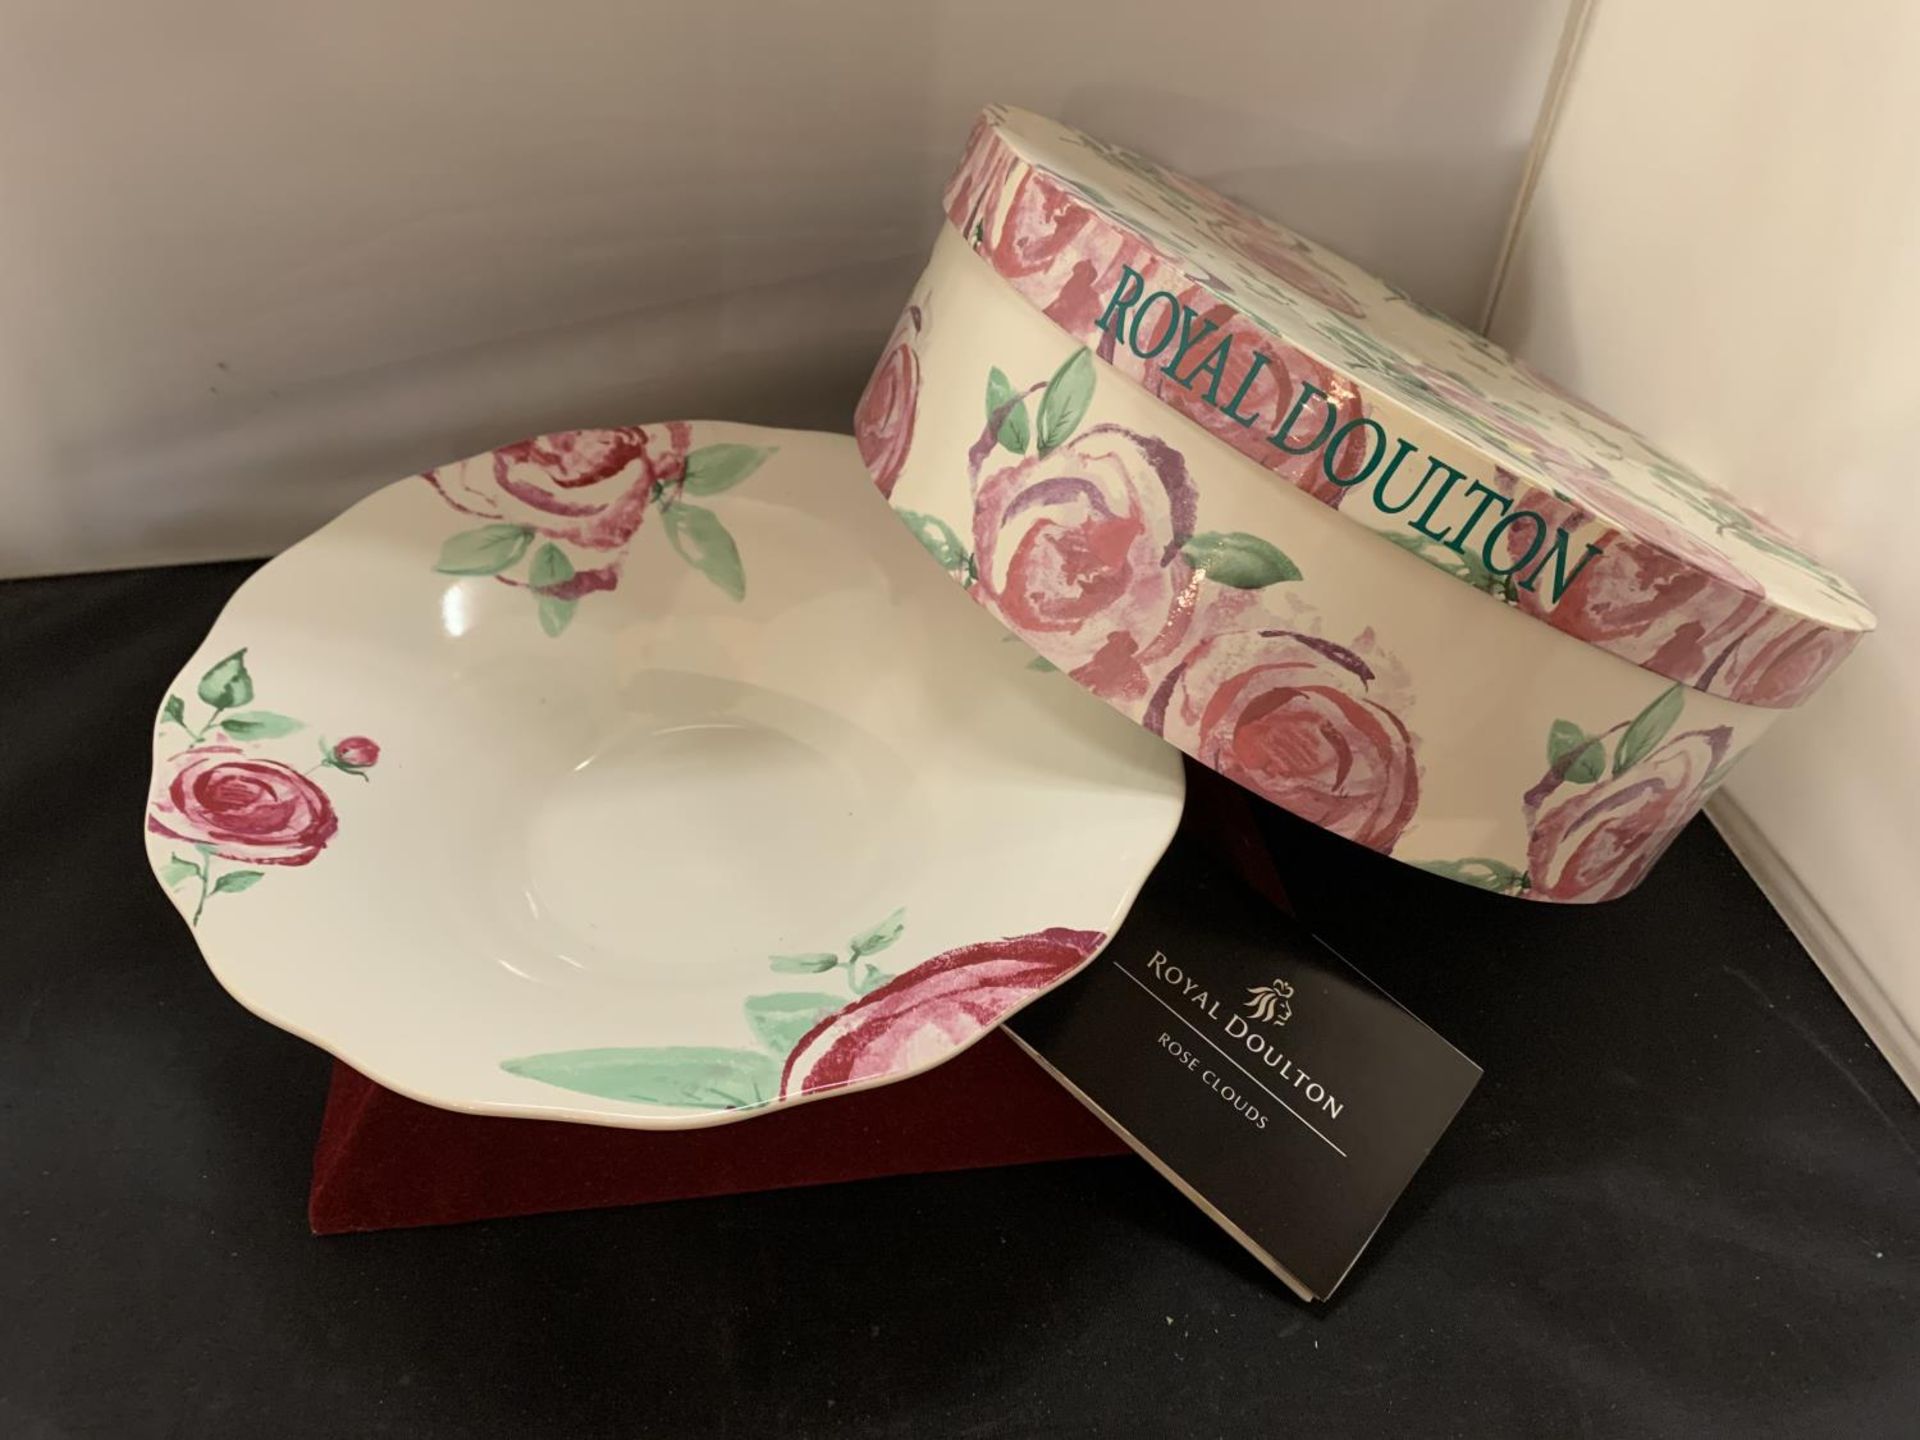 A ROYAL DOULTON ROSE CLOUDS LOW BOWL IN A PRESENTATION BOX